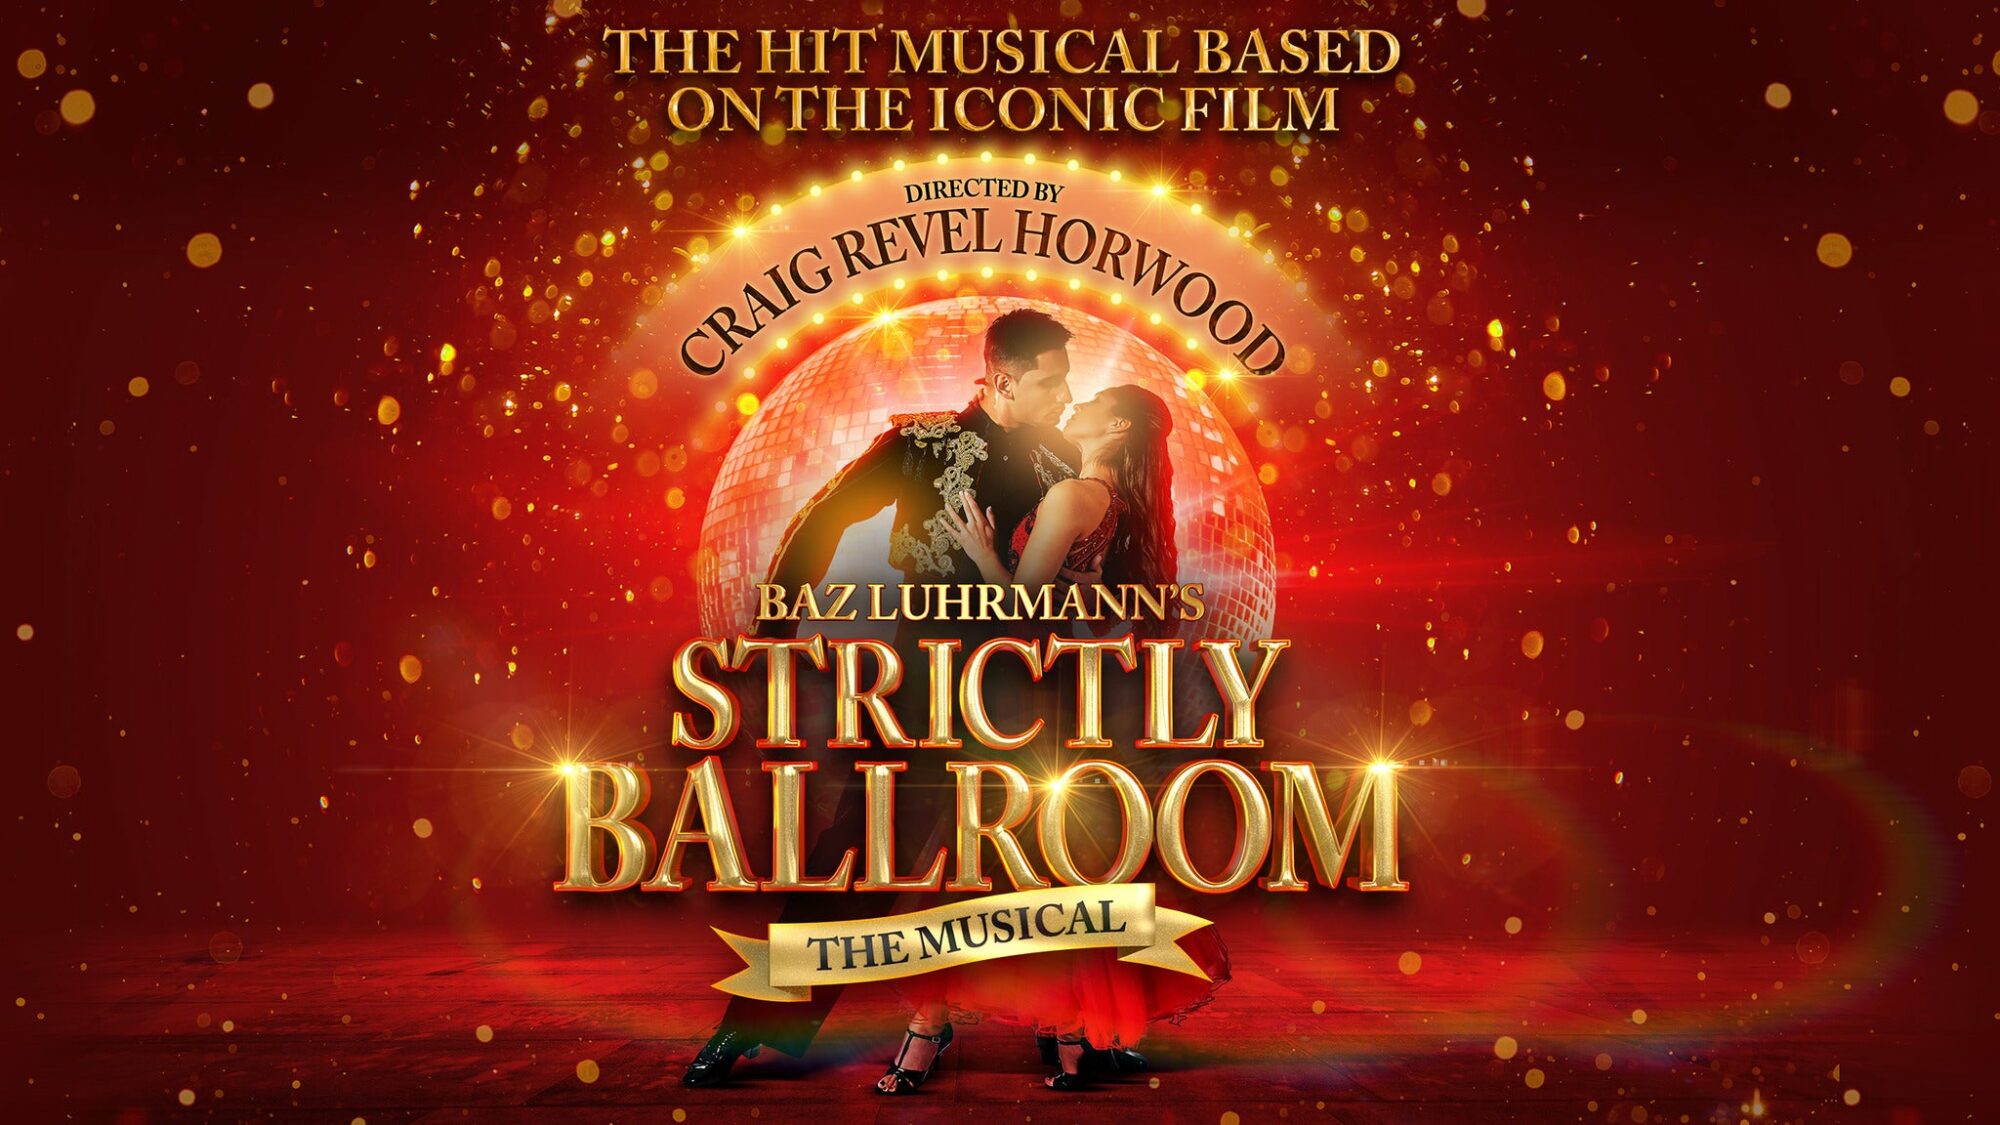 Image name Strictly Ballroom The Musical at Hull New Theatre Hull the 22 image from the post Events in Yorkshire.com.